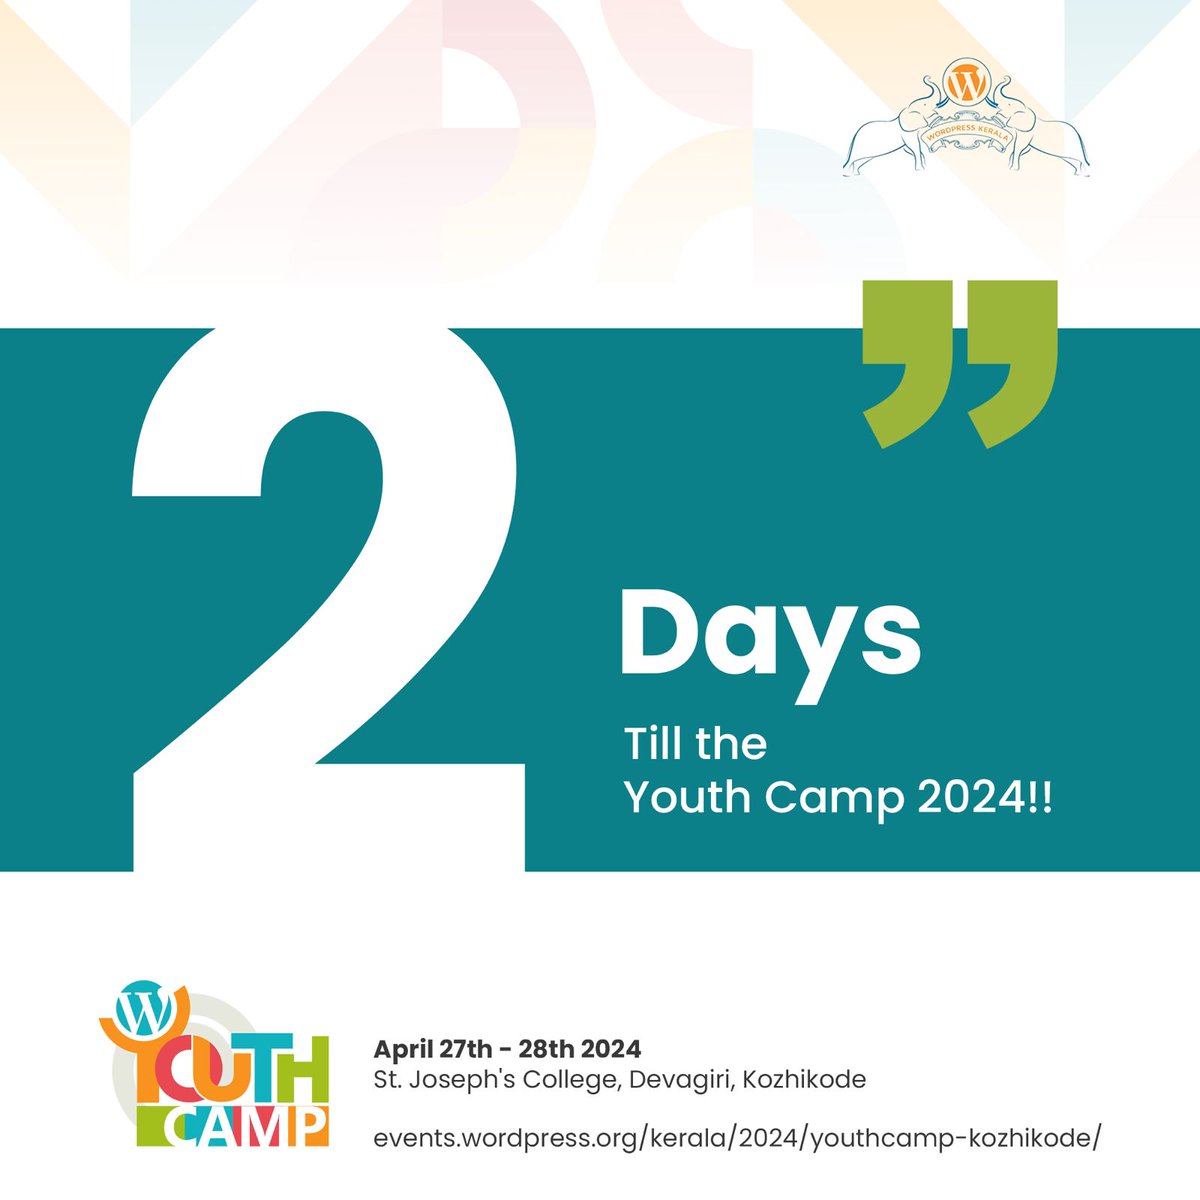 ⏰ ONLY TWO MORE DAYS UNTIL #YouthCamp #Kozhikode 🚨
We have very limited seats left for this exciting #WordPress workshop for students. Get your tickets and join us on Apr 27-28 at St Josephs College Devagiri to learn & build your first website! 
events.wordpress.org/kerala/2024/yo…